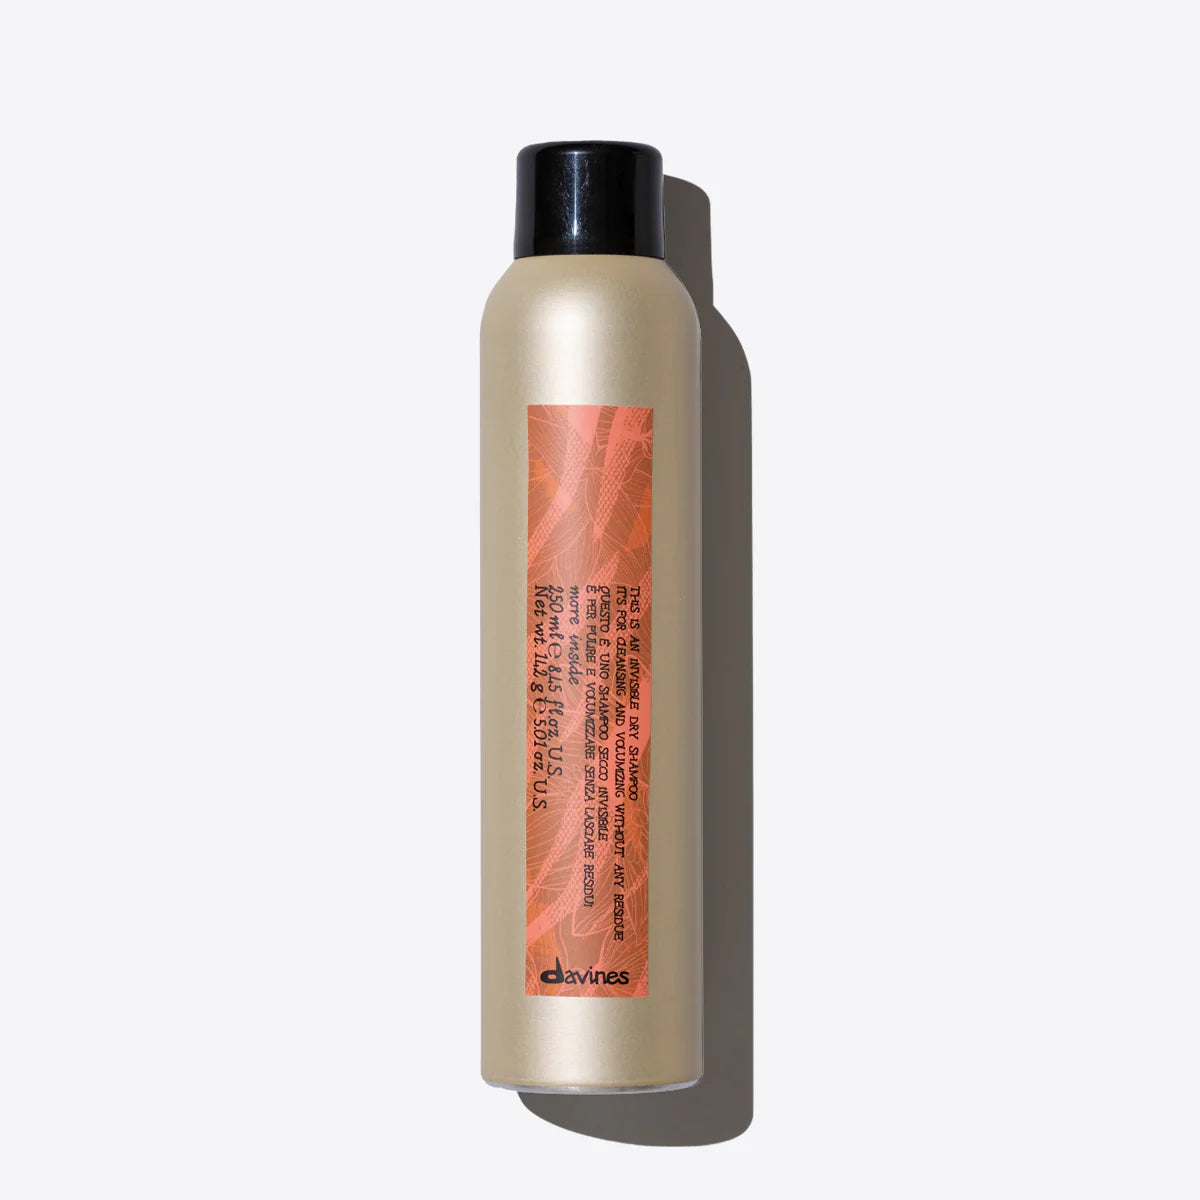 THIS IS INVISIBLE DRY SHAMPOO